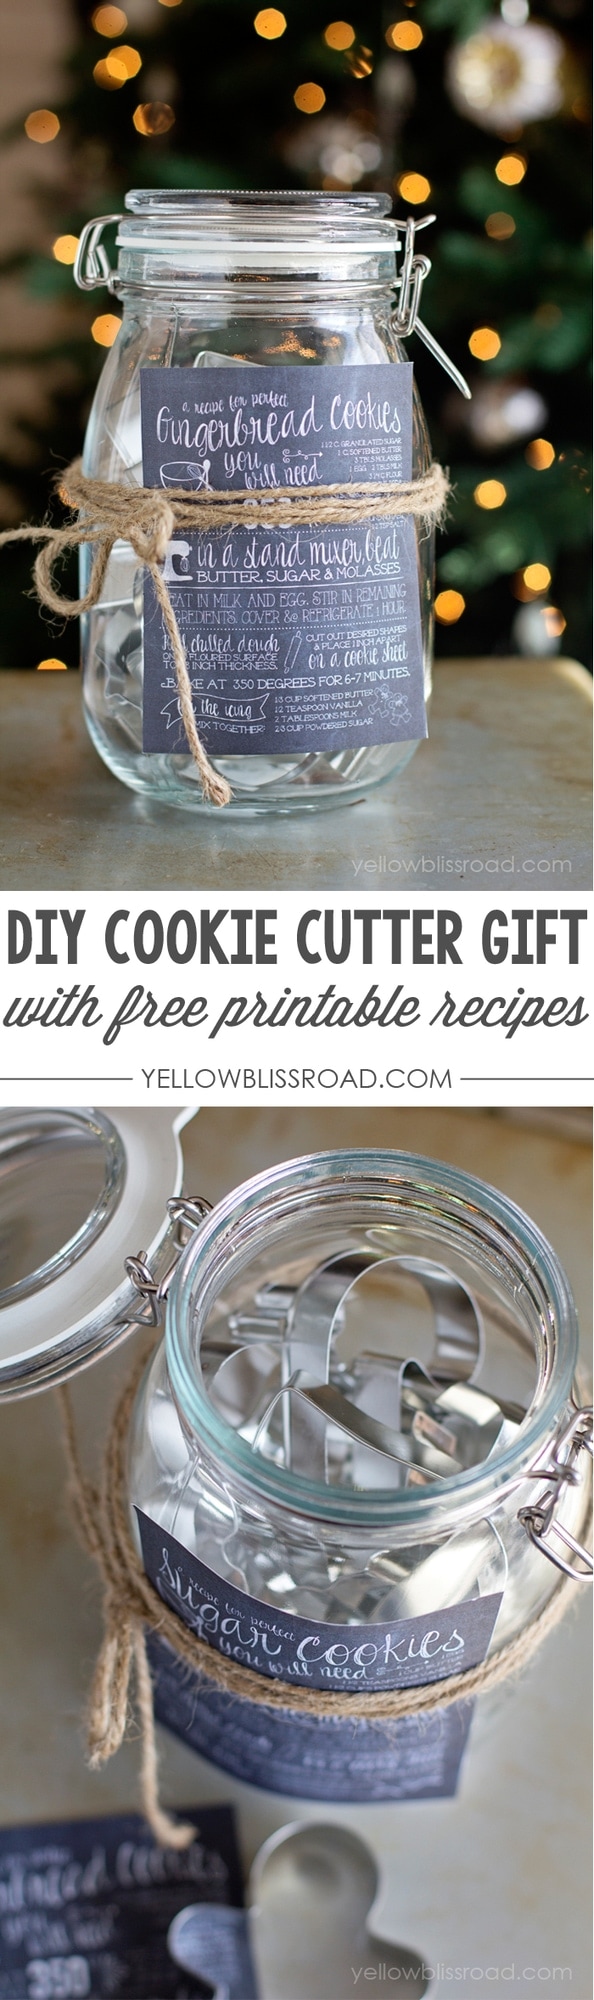 DIY Christmas Gift Idea - Cookie Cutters in a jar with Free Printable Recipes